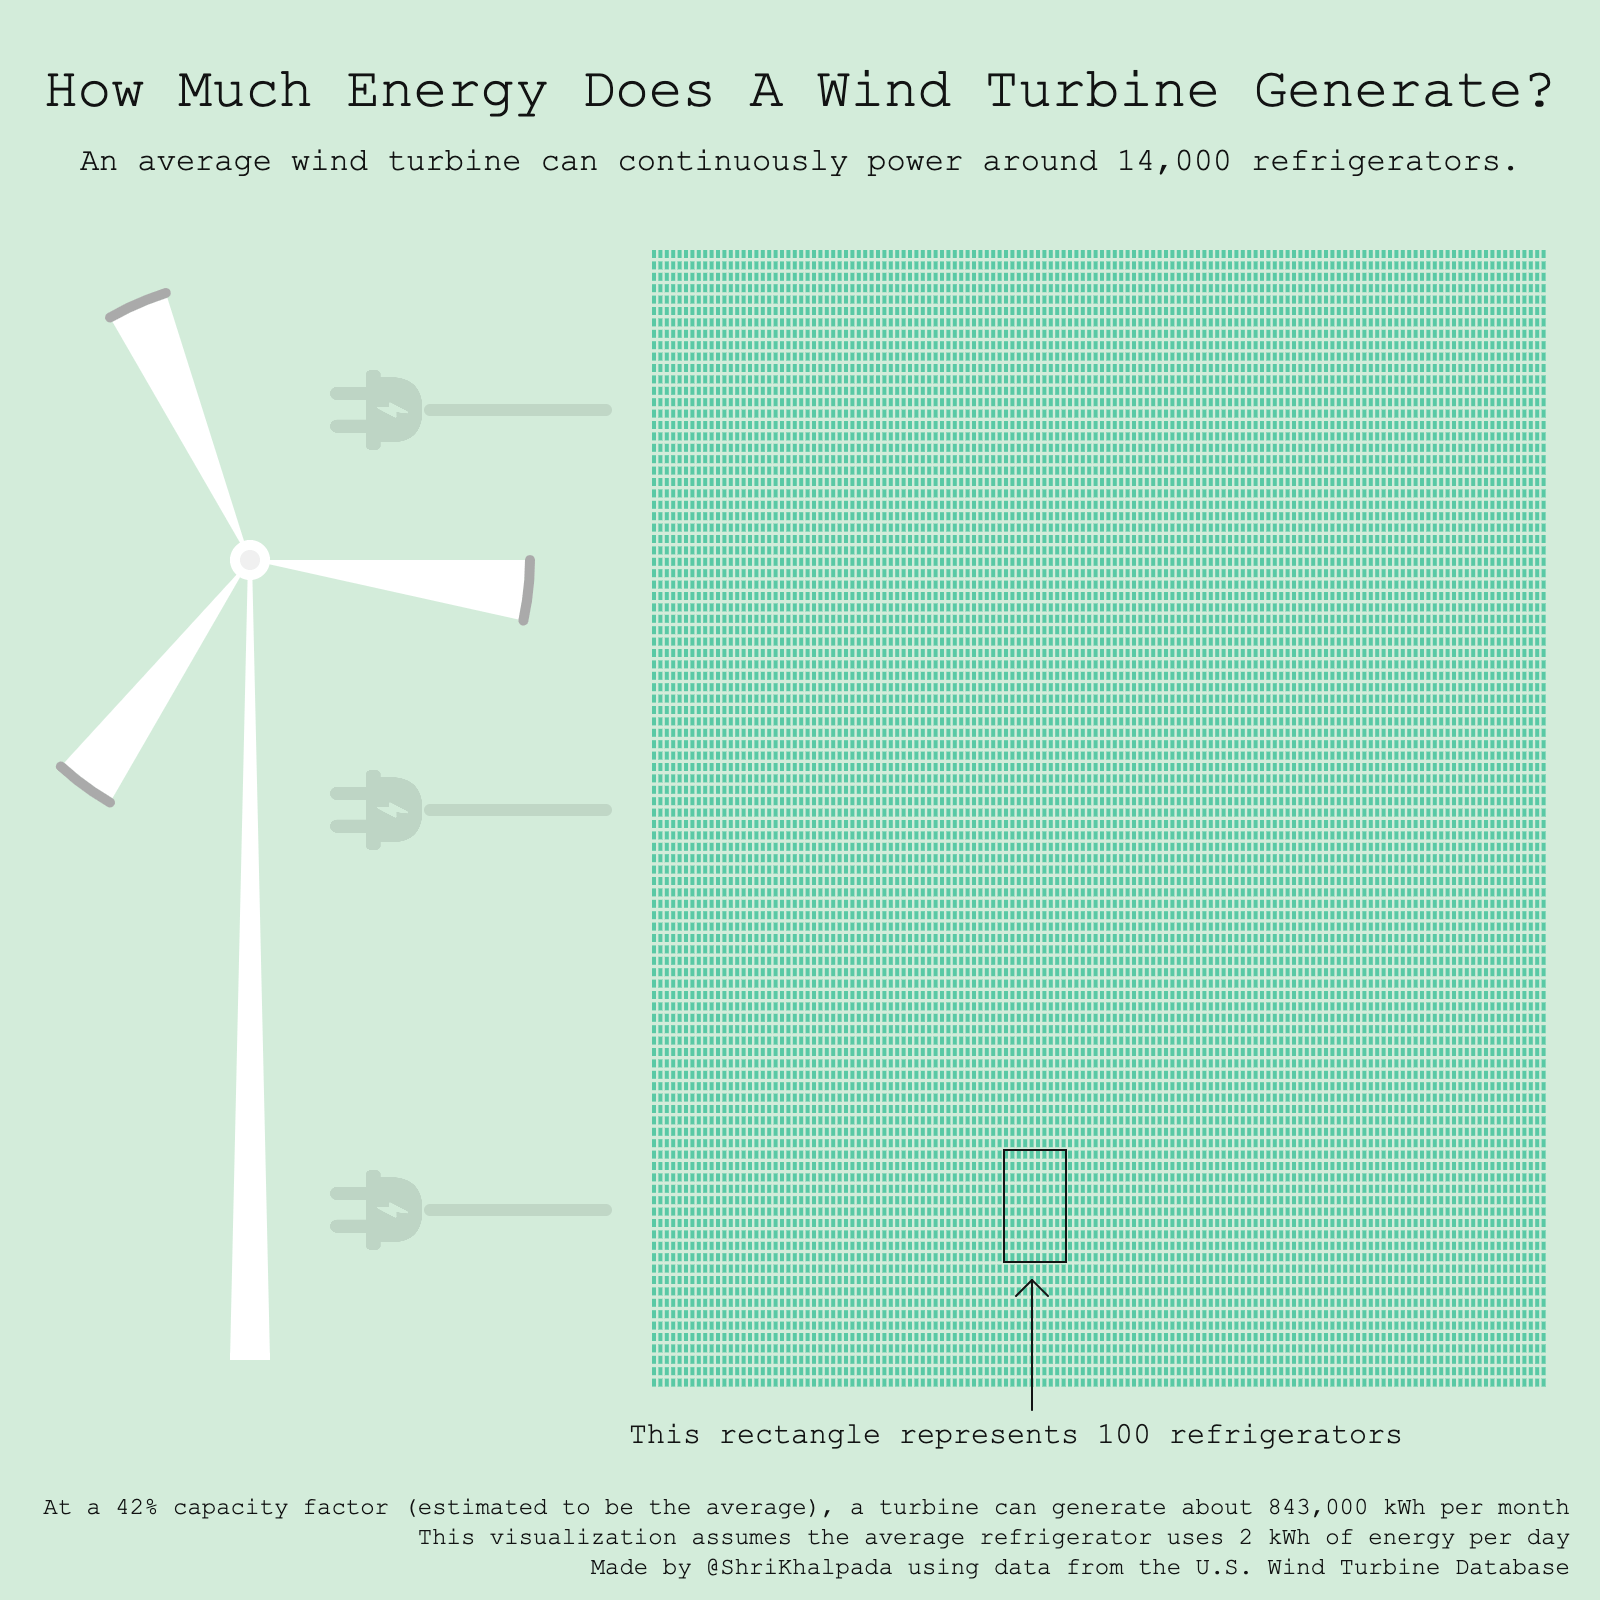 An infographic titled "How Much Energy Does A Wind Turbine Generate?" depicting a wind turbine and a large grid of squares, with each square representing the energy consumption equivalent of 100 refrigerators. The average turbine can power 14,000 refrigerators.